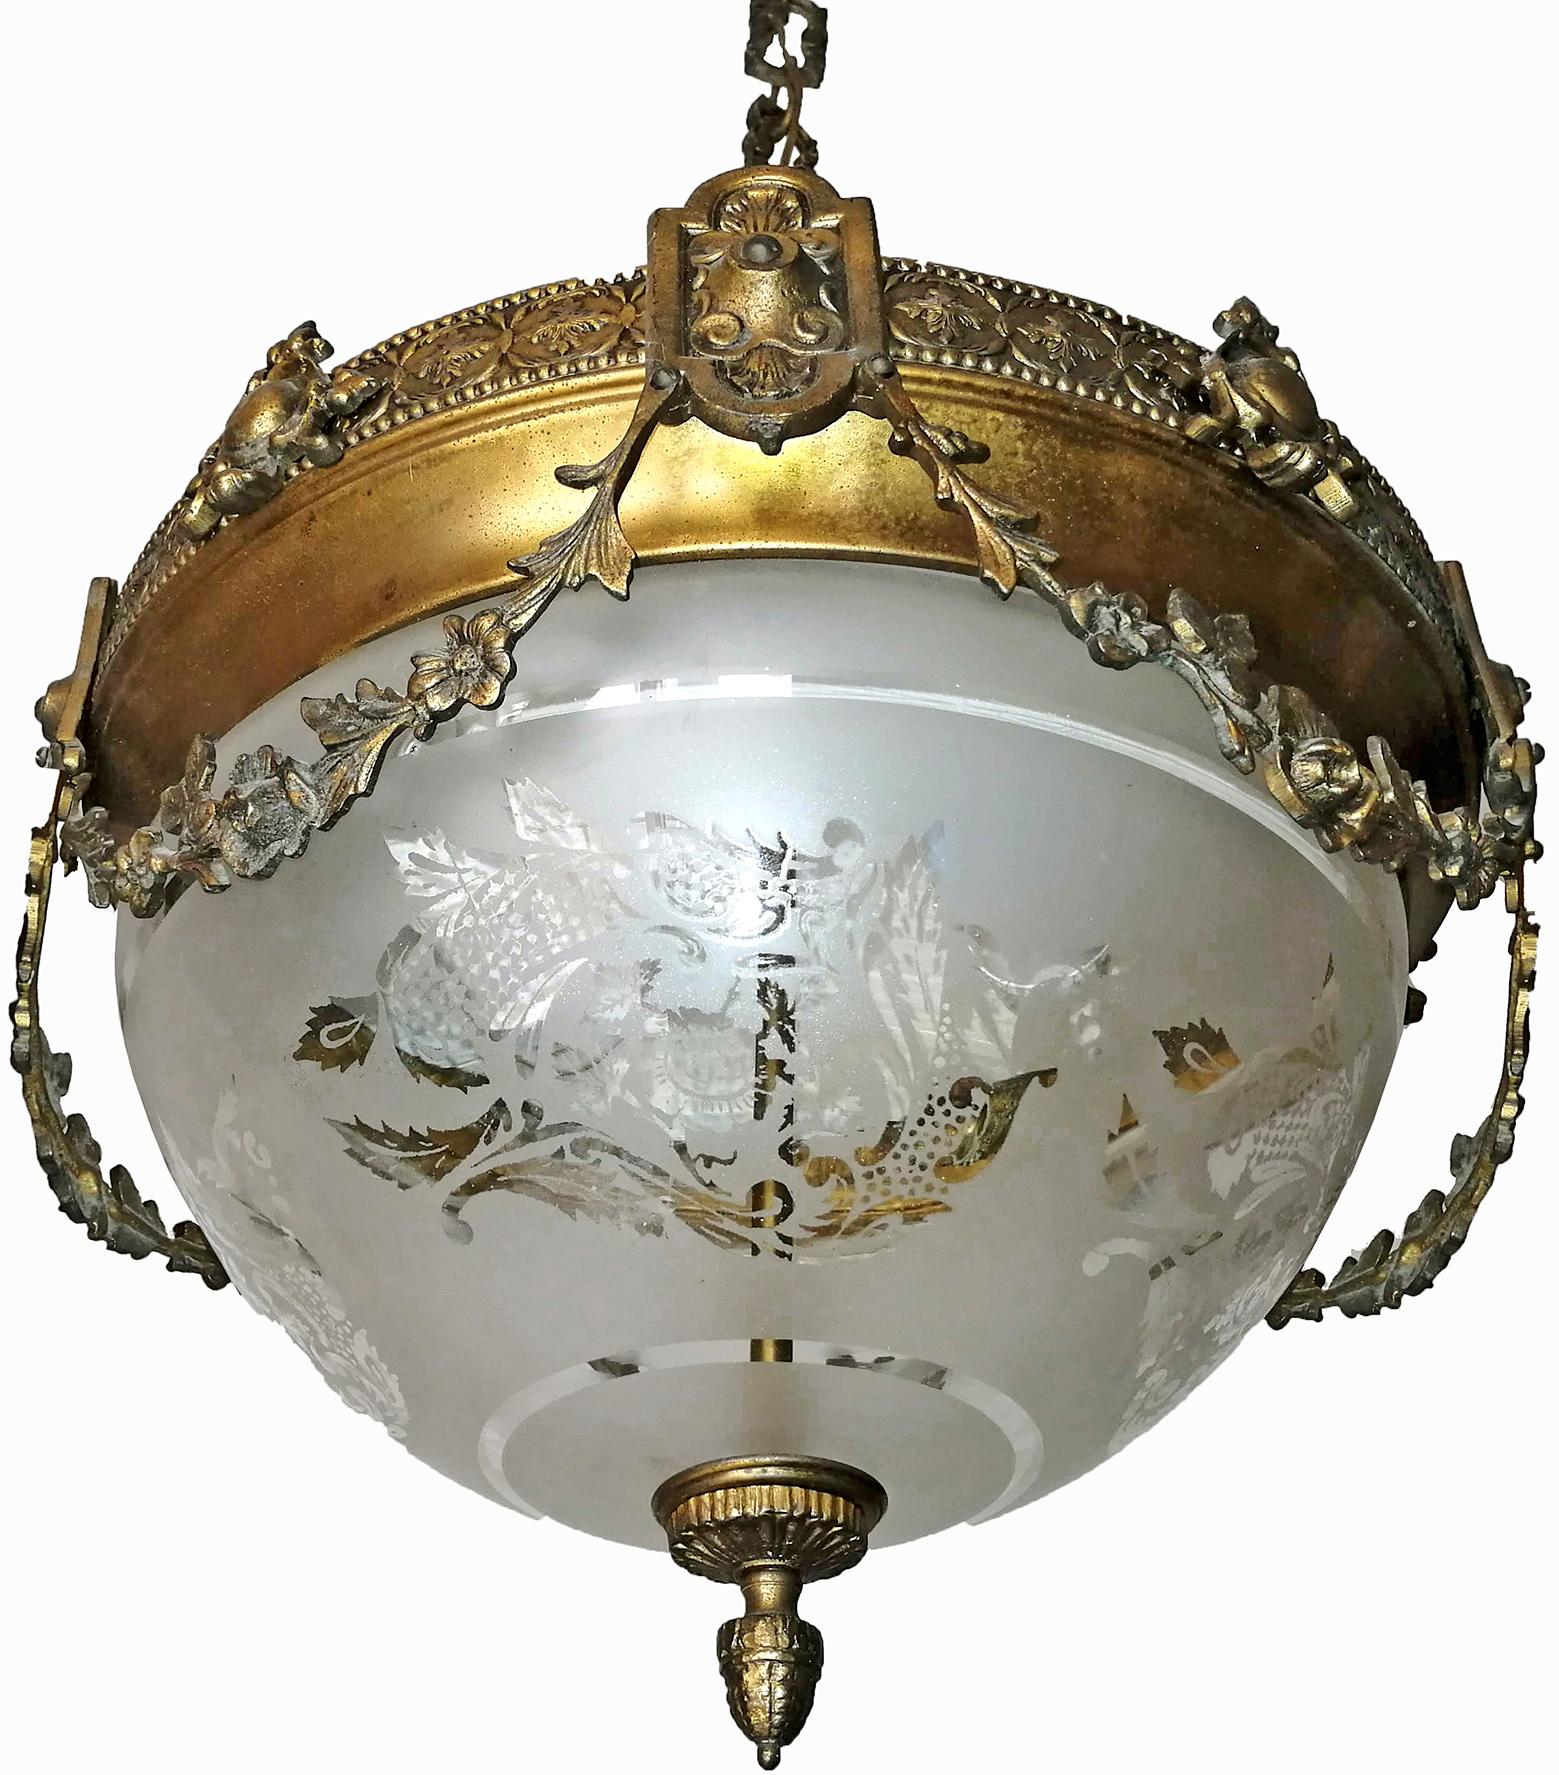 A wonderful gilt bronze and etched-glass two-light ceiling fixture decorated with fine ornaments and garlands, France, early 20th century.
In very good condition - original etched-glass shades without damages, bronze with beautiful patina.
Two